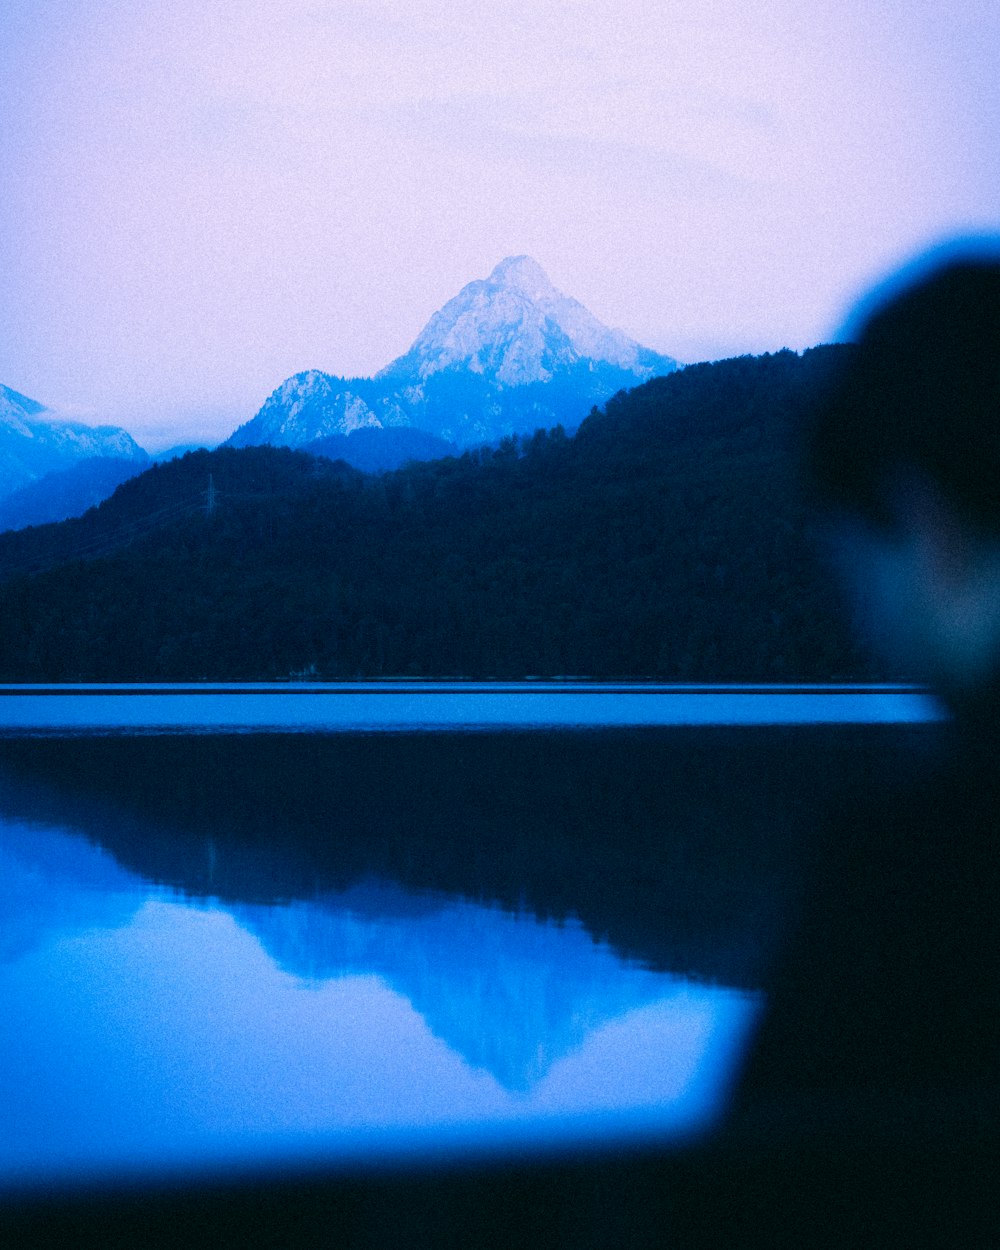 a person standing in front of a lake with a mountain in the background